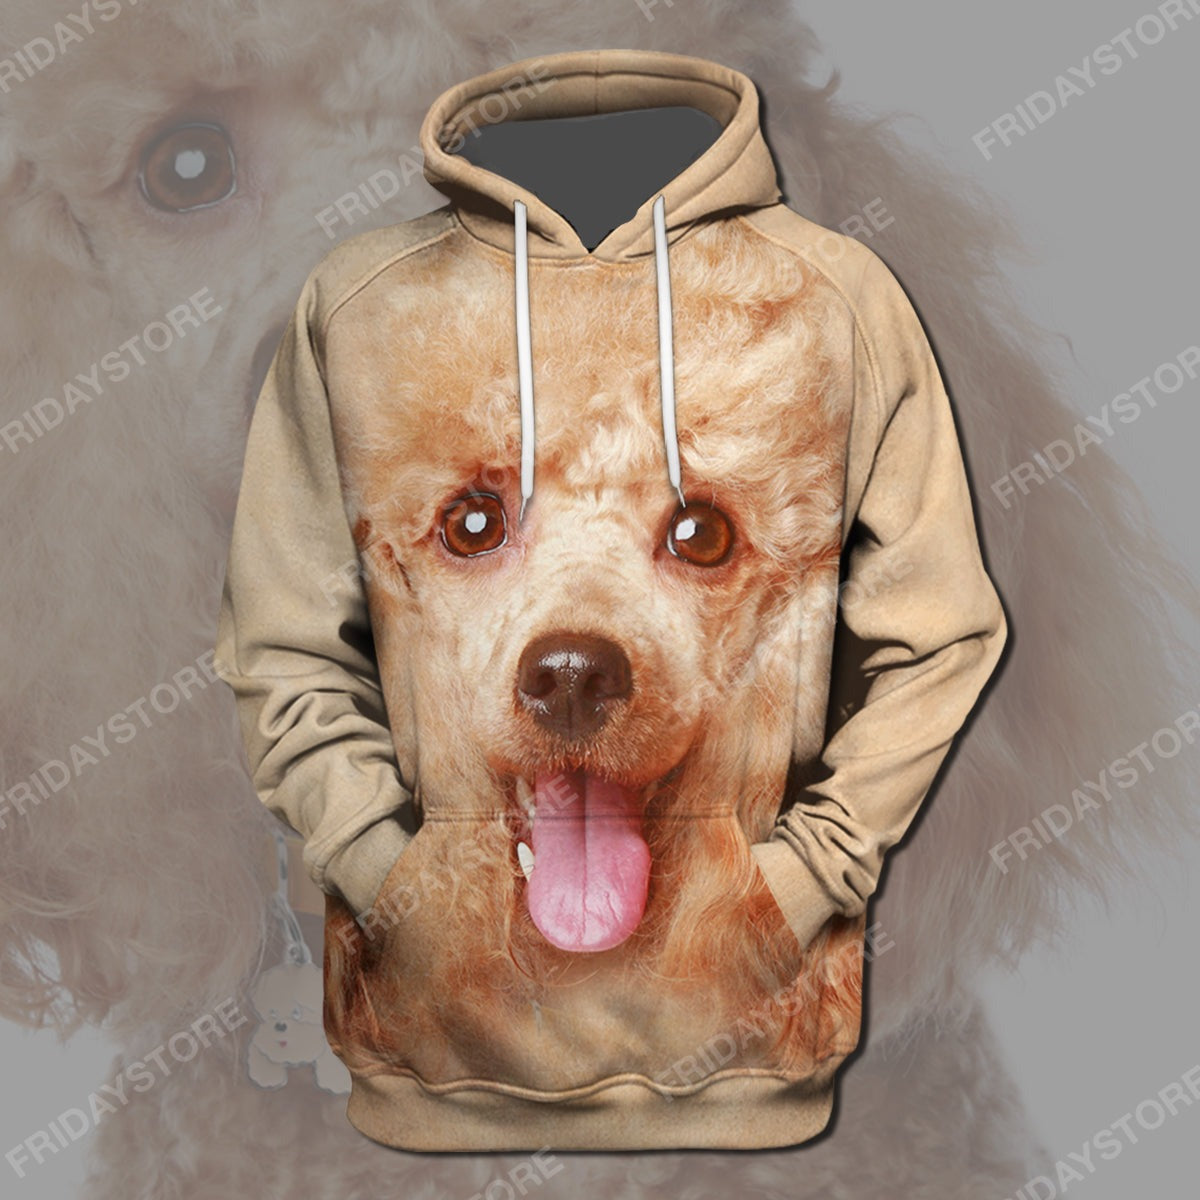 Unifinz Dog Hoodie Poodle Hoodie Poodle Dog Graphic Pale Yellow Hoodie Cute Dog Shirt Sweater Tank Apparel 2022